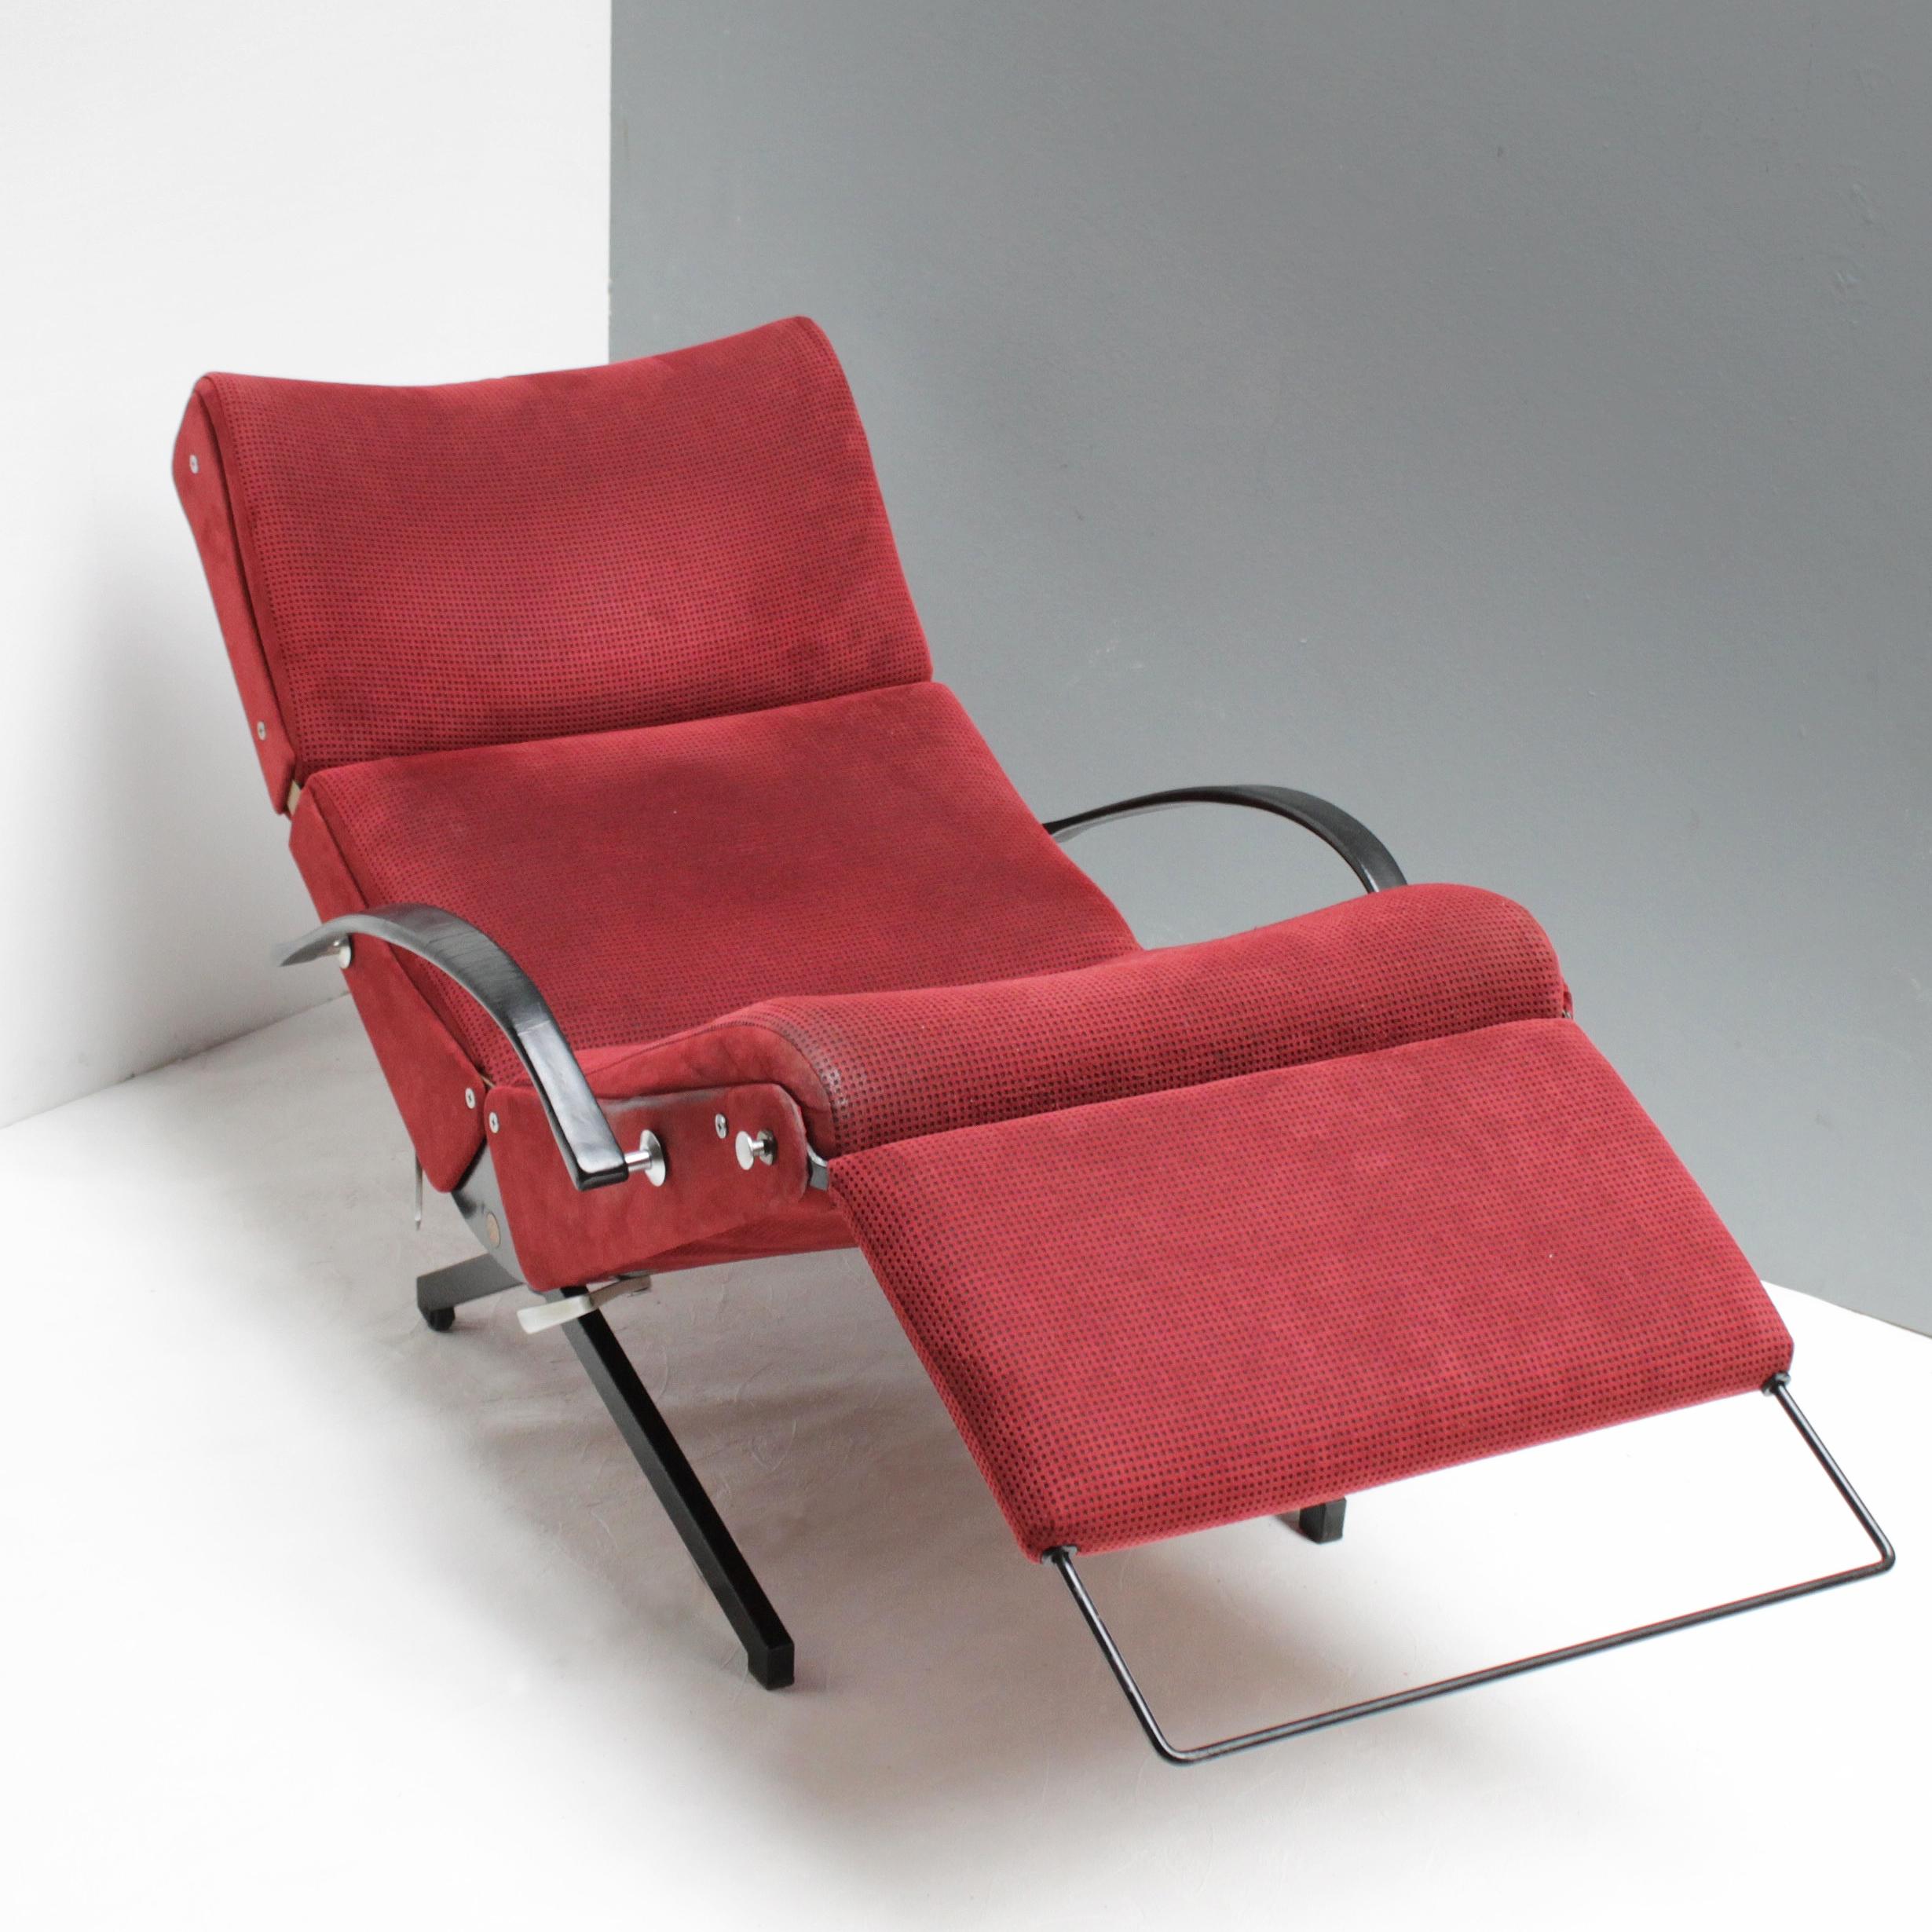 The very versatile P40 lounge chair is one of the true icons of 20th century Italian furniture design. Launched back in 1955 this ‘ideological manifesto’ of the Tecno Company has been in production ever since. This particular copy was most likely